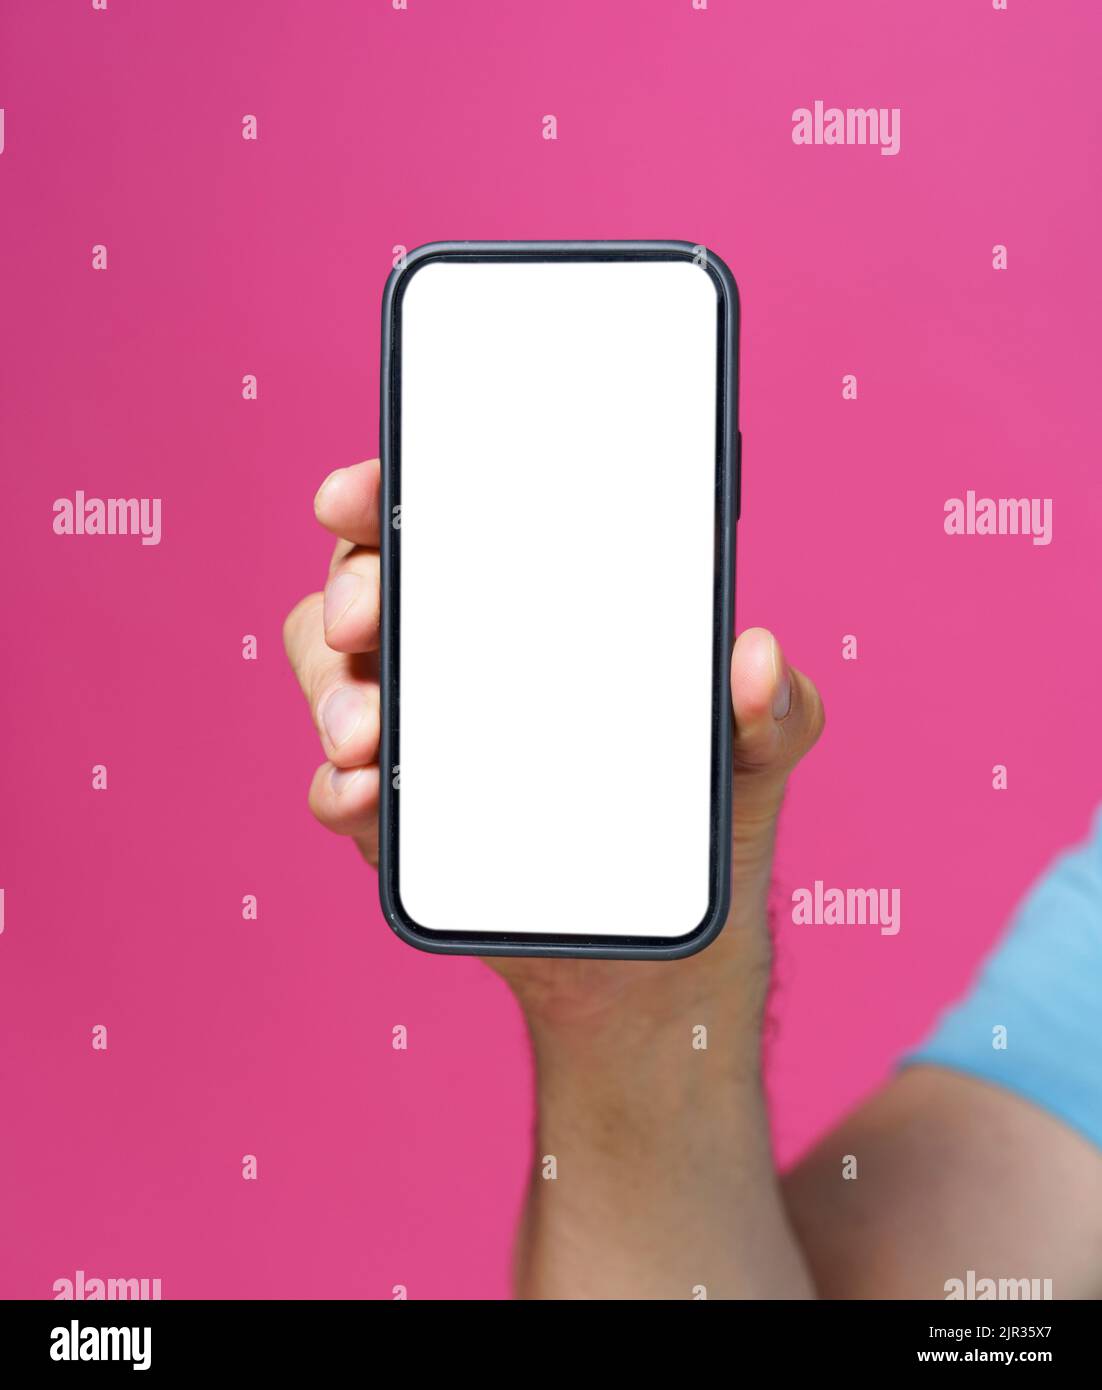 Close up man hand holding smartphone with white blank screen and black phone case. Isolated on pink background. Mobile phone frameless design concept for mobile app advertising. Copy space.  Stock Photo